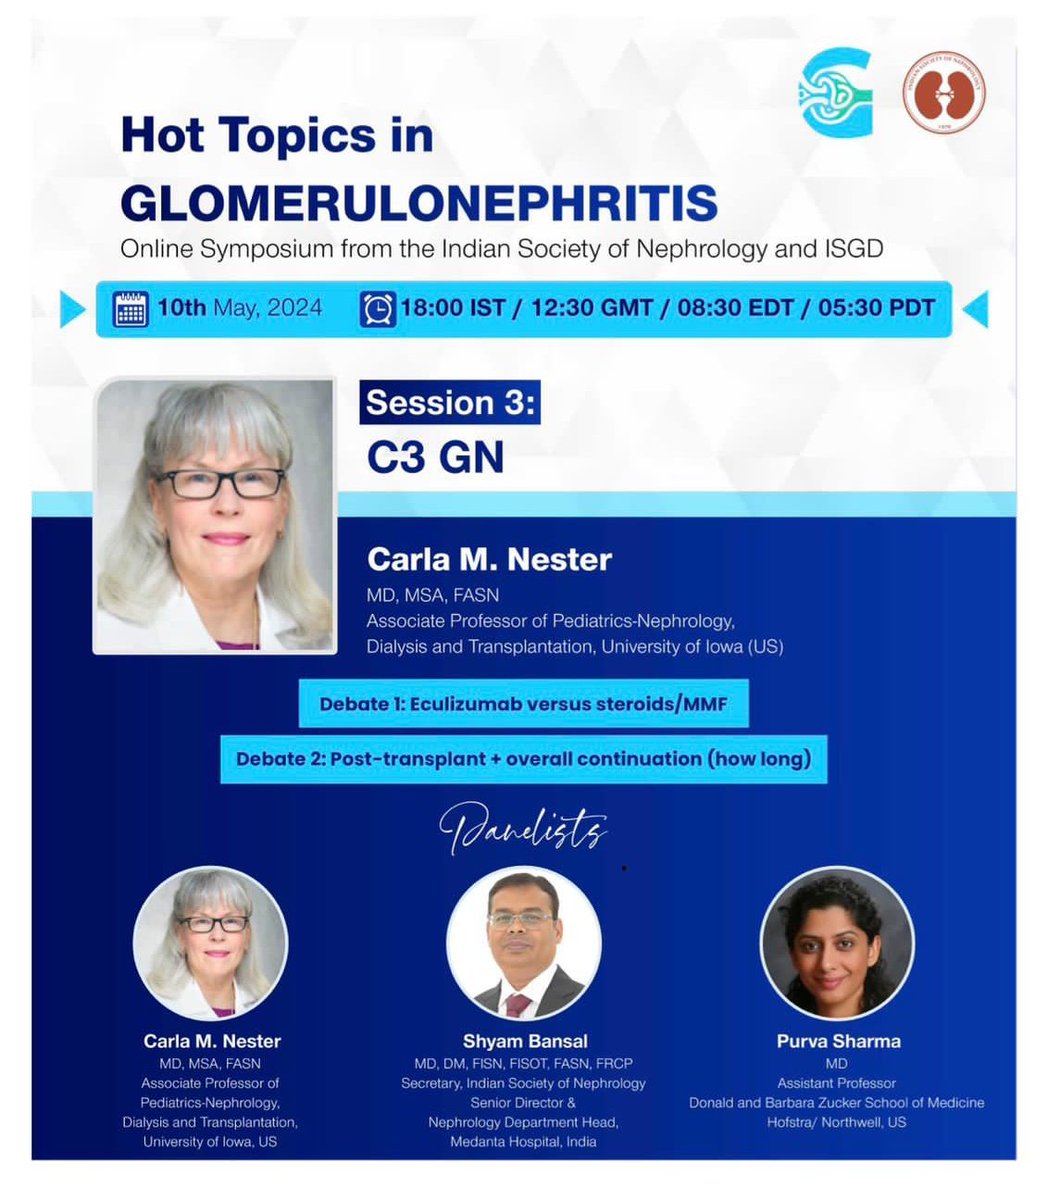 Dont Miss Prof Carla Nester speak on key aspects of C3GN in Online Symposium on Glomerulnephritis by the @isn_india and @ISGDtweets. 10th May 2024, 6.00PM IST. @drshyambansal @AnandhUrmila @manirath @ISNeducation @ASNKidney @GlomCon Register at is-gd.org/hot-topics-in